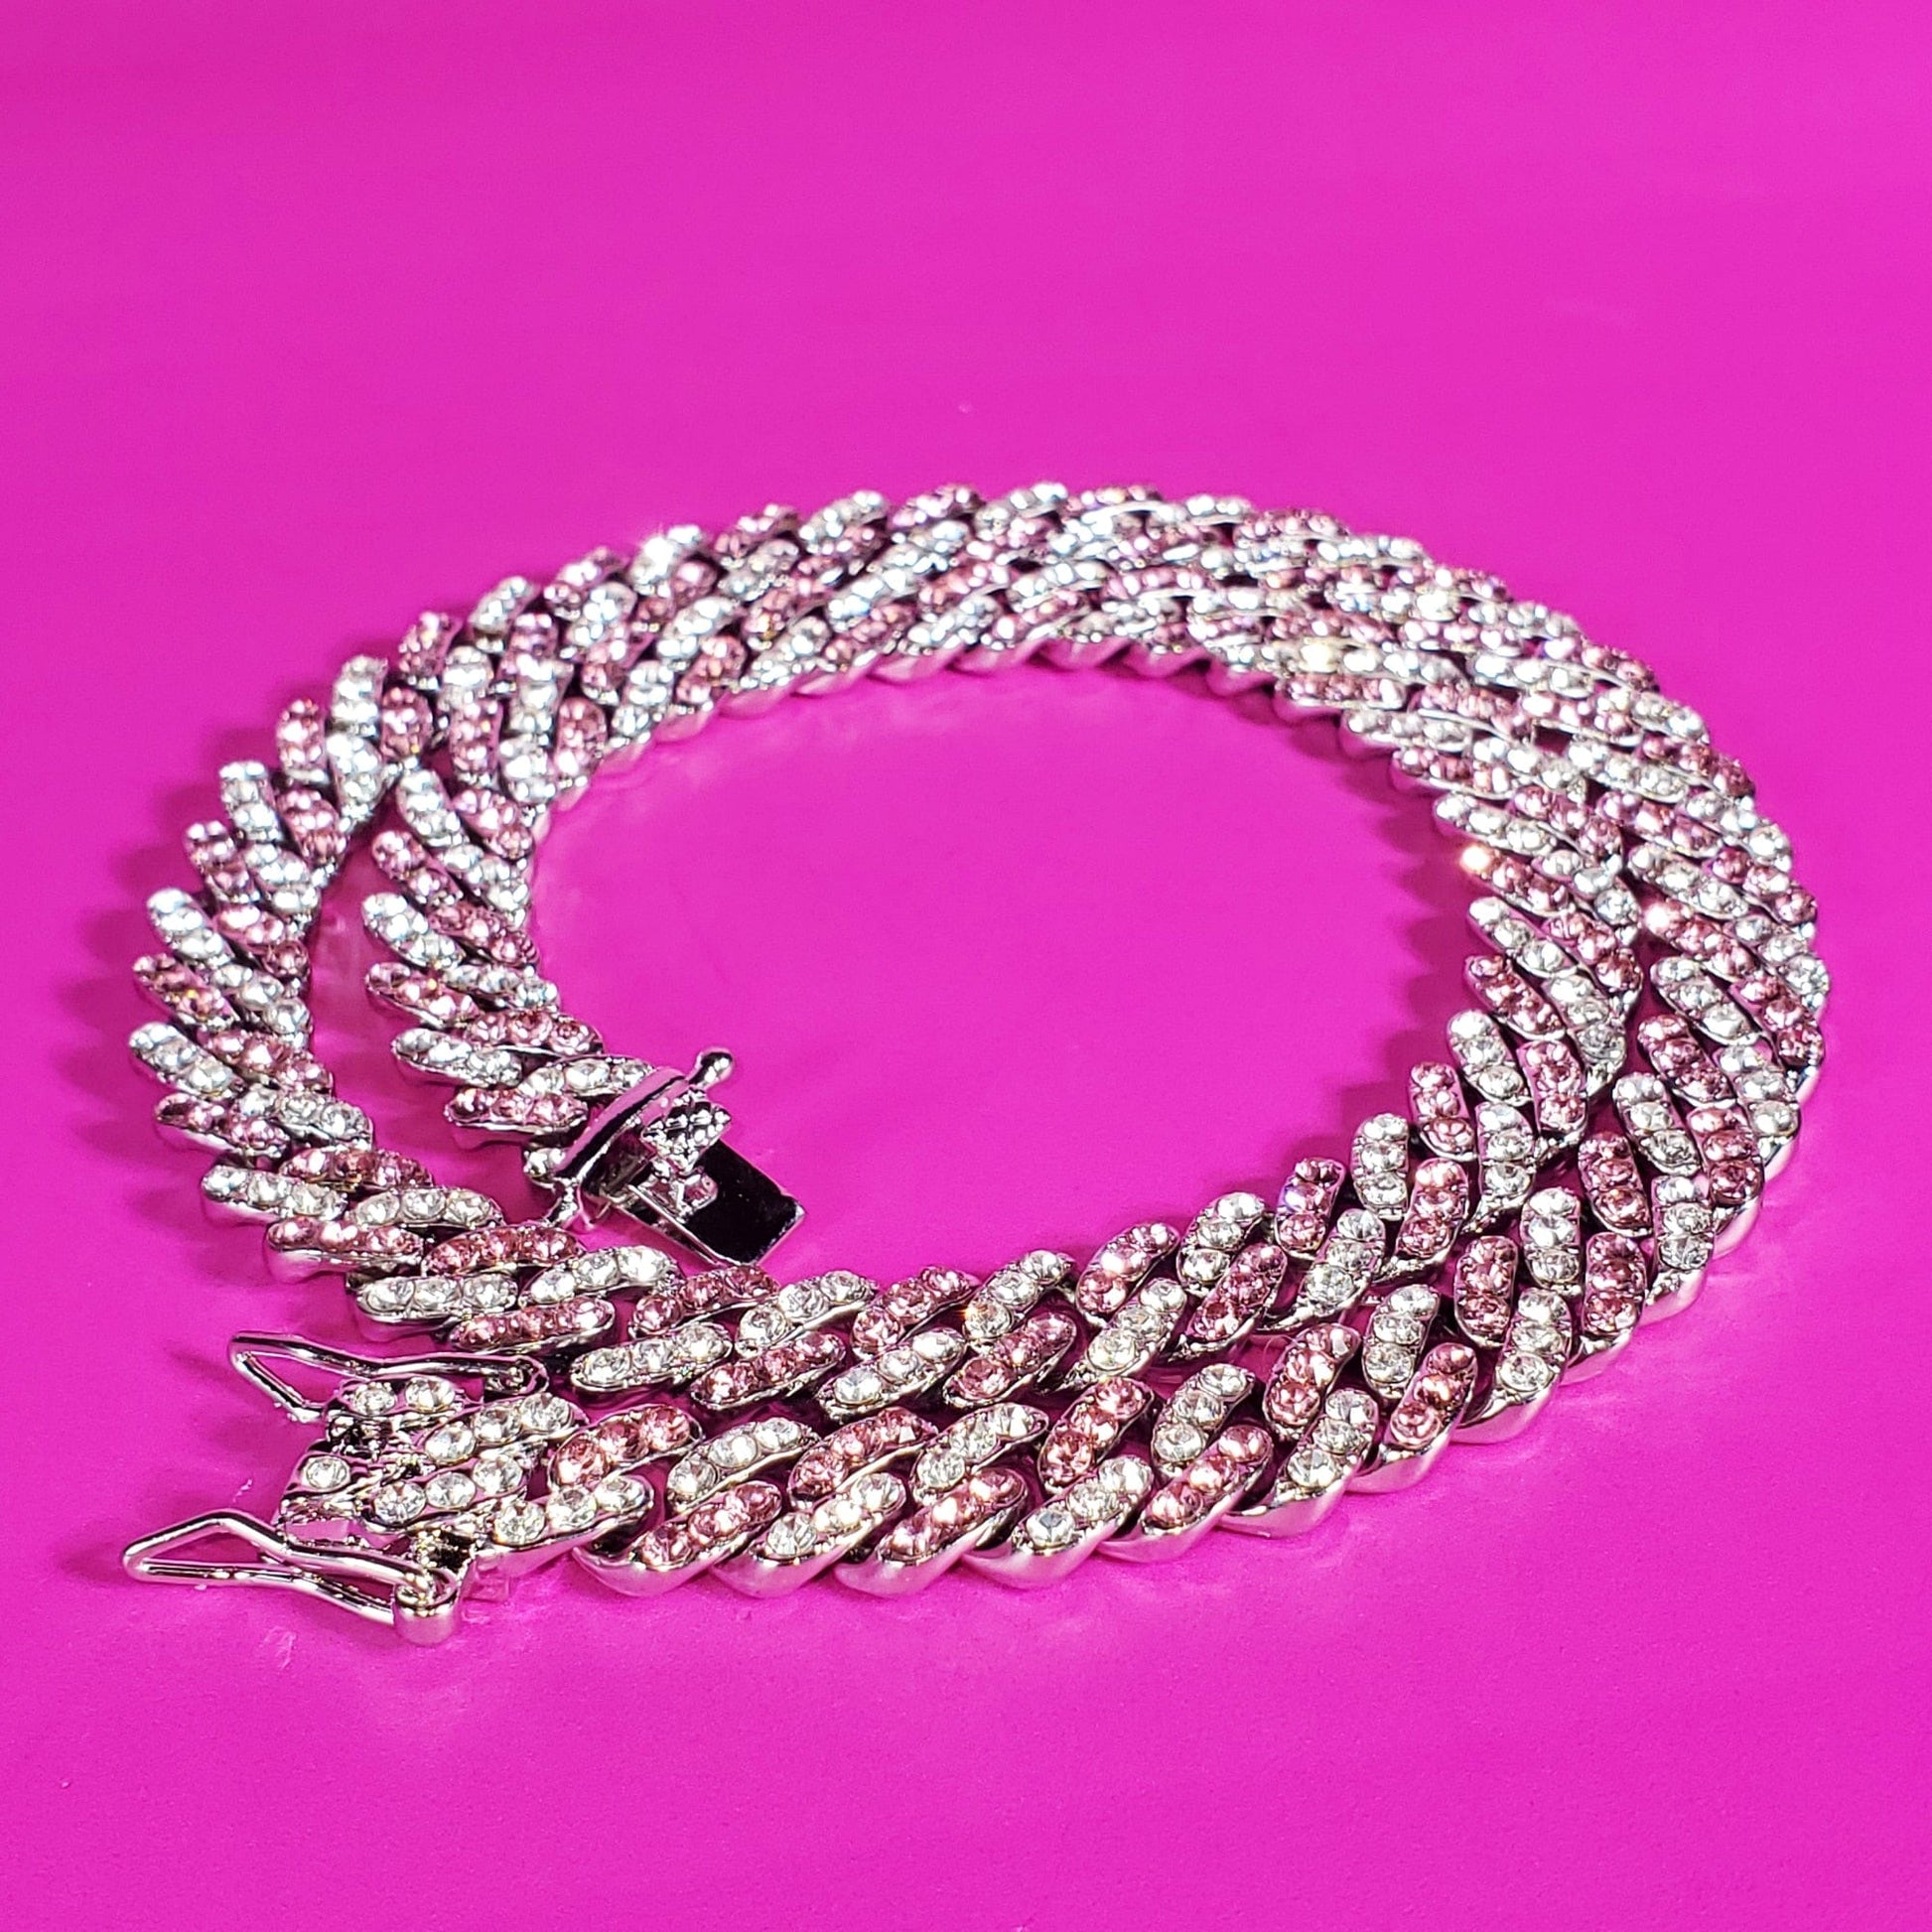 'Crystal Candy Cane' 9mm Pink & Clear CZ Cuban Chain Silver Necklaces by Bling Addict | BlingxAddict